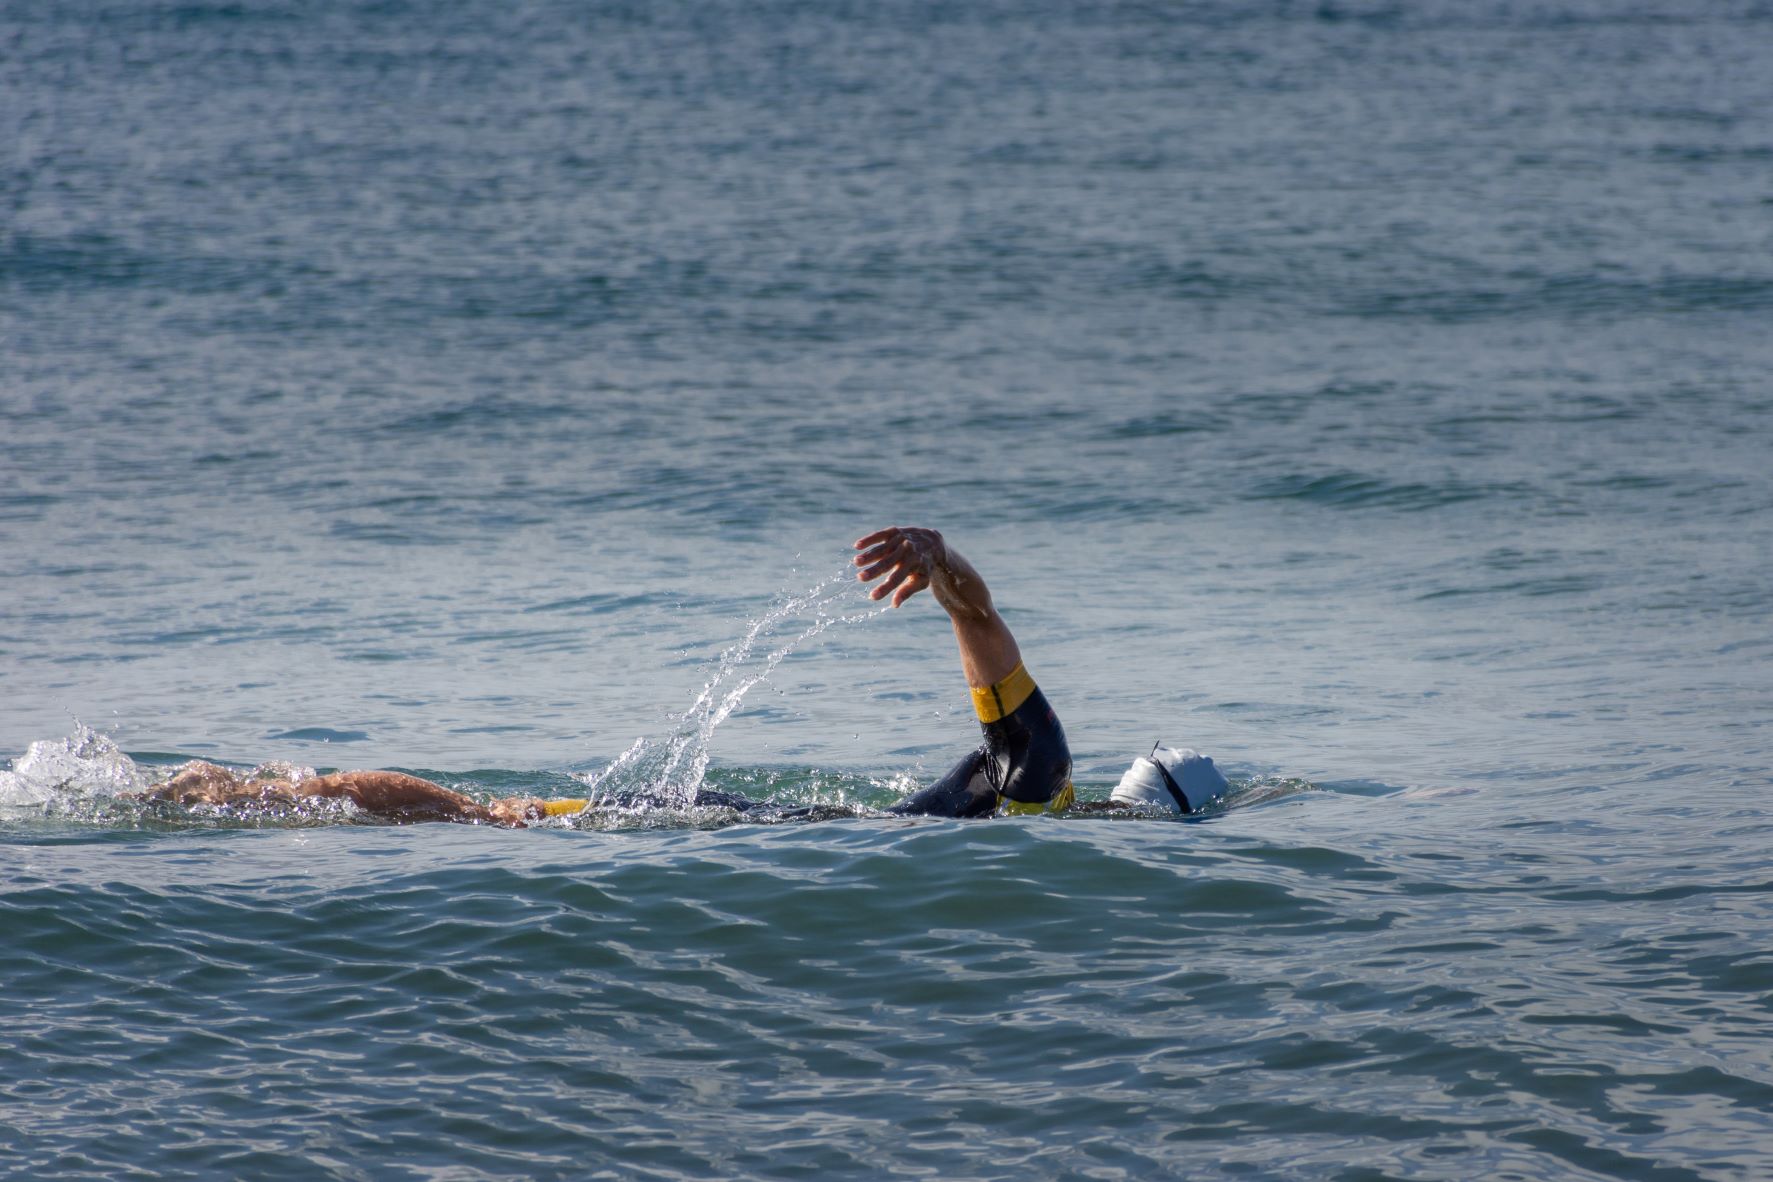 Swimming doing freestyle strokes in open water, wearing a wetsuit, swim cap, and goggles.